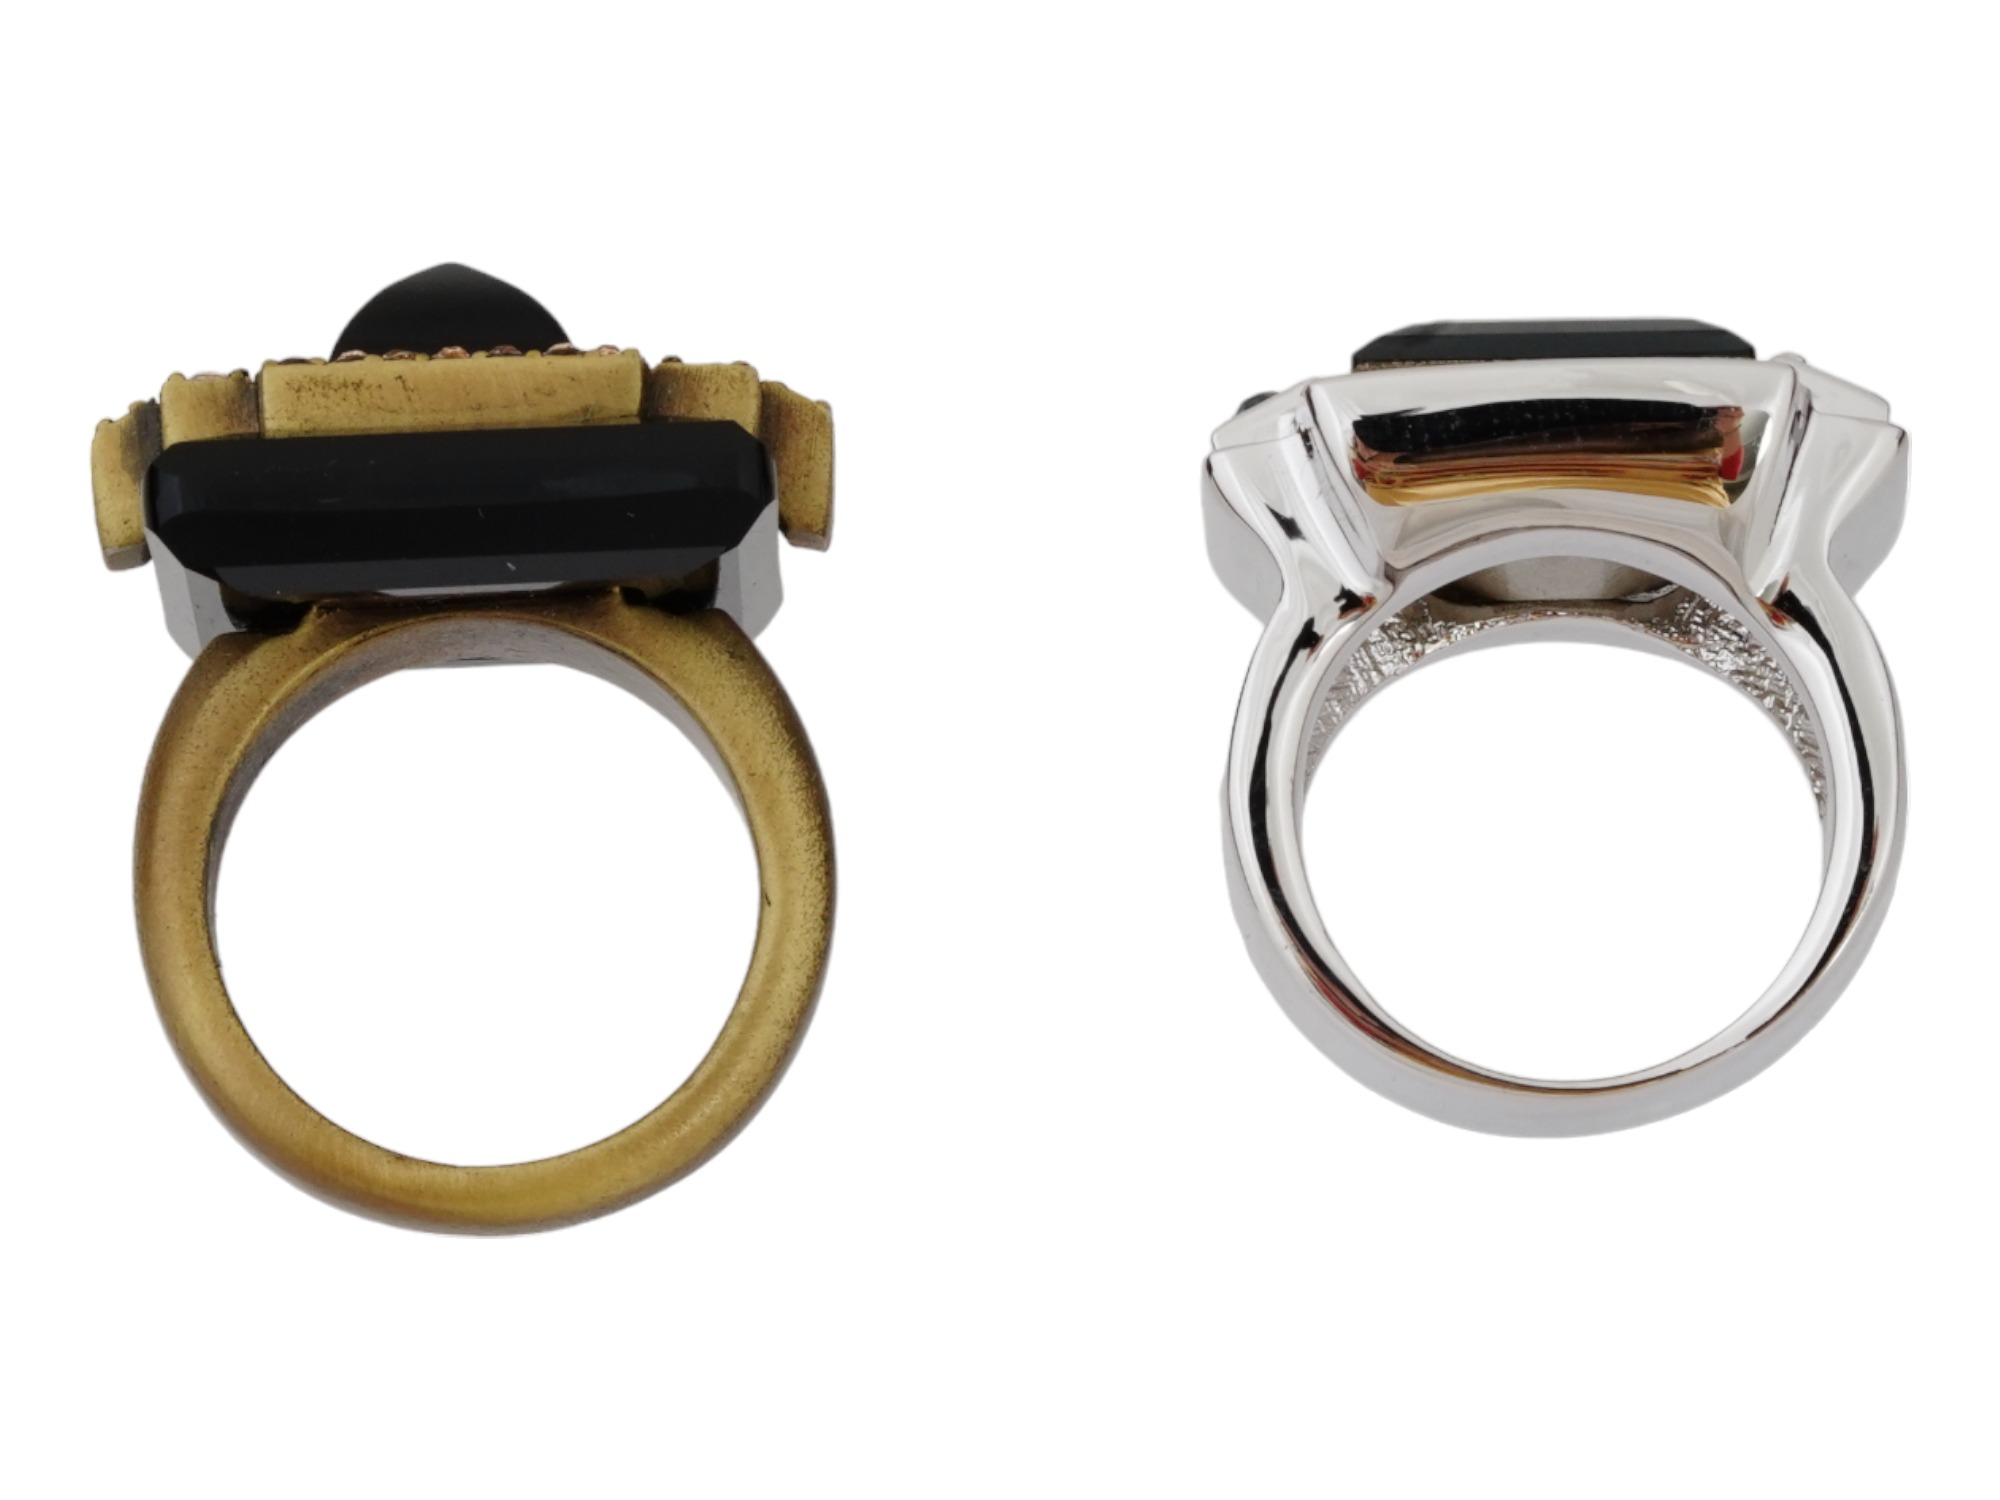 JUDITH LEIBER DECO AND CHERISSE COCKTAIL RINGS IOB PIC-6